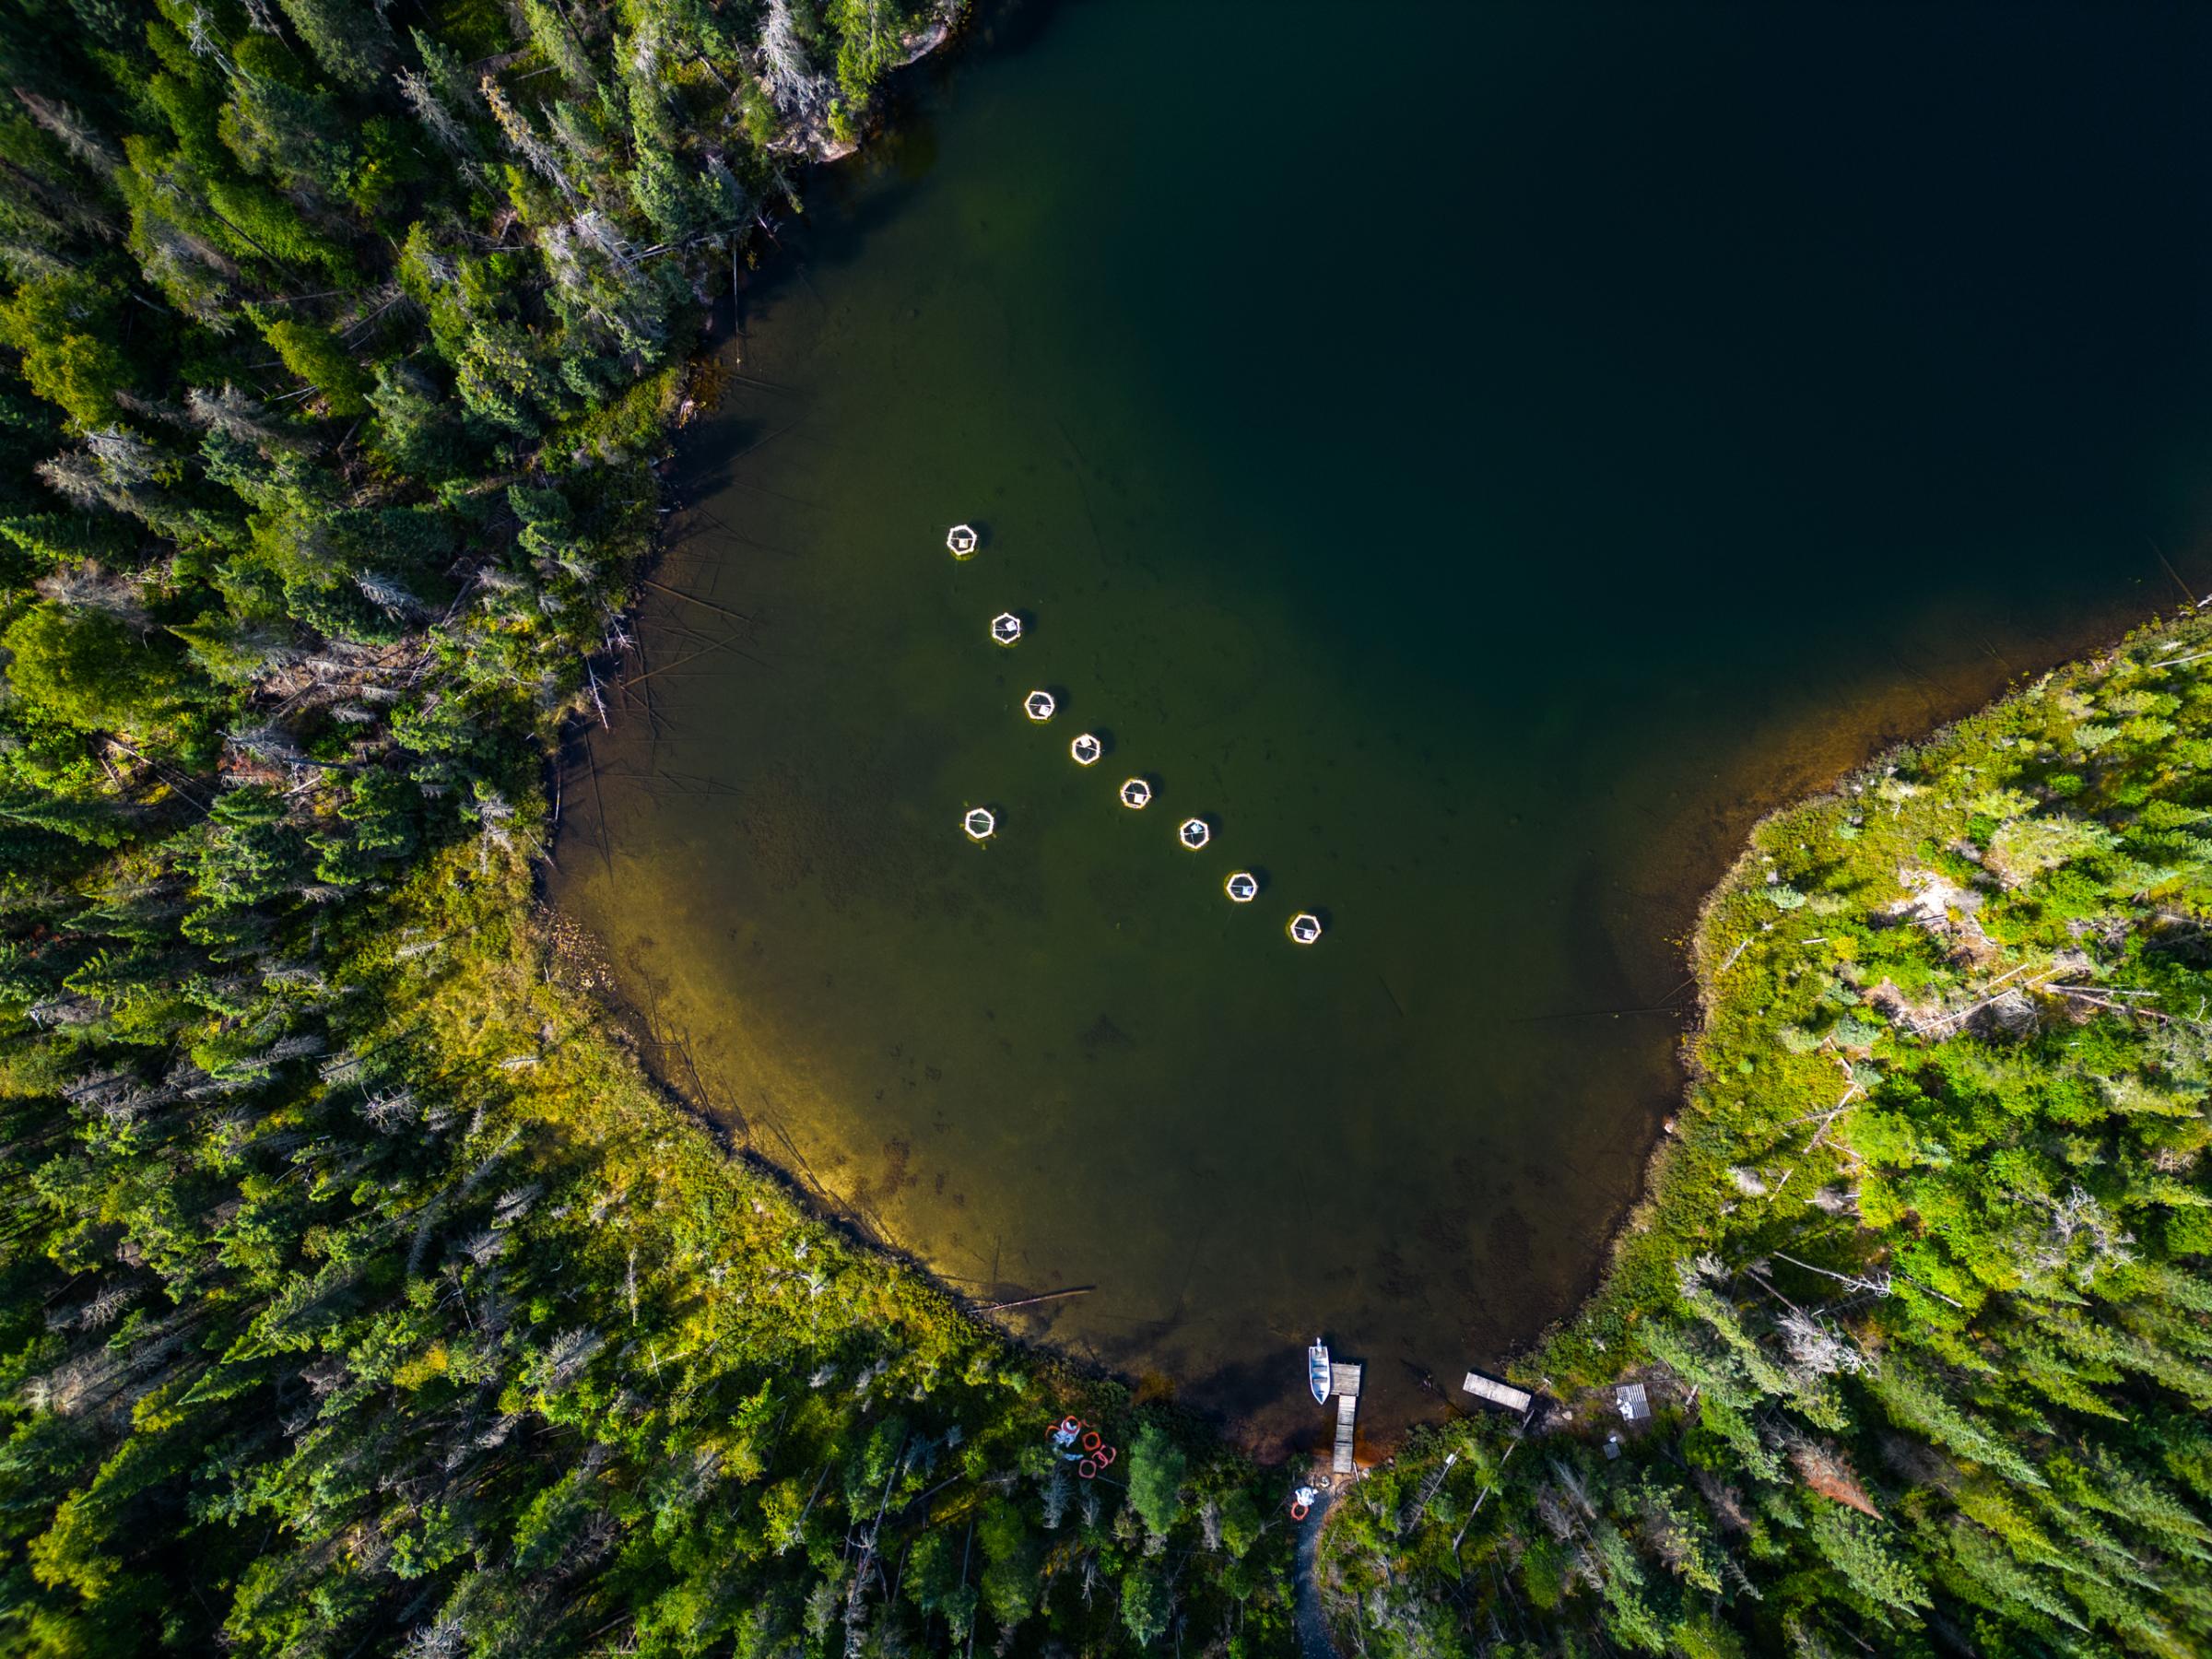 The ability to conduct controlled experiments by lake manipulation and observation has drawn interest from researchers worldwide. The abundance of...